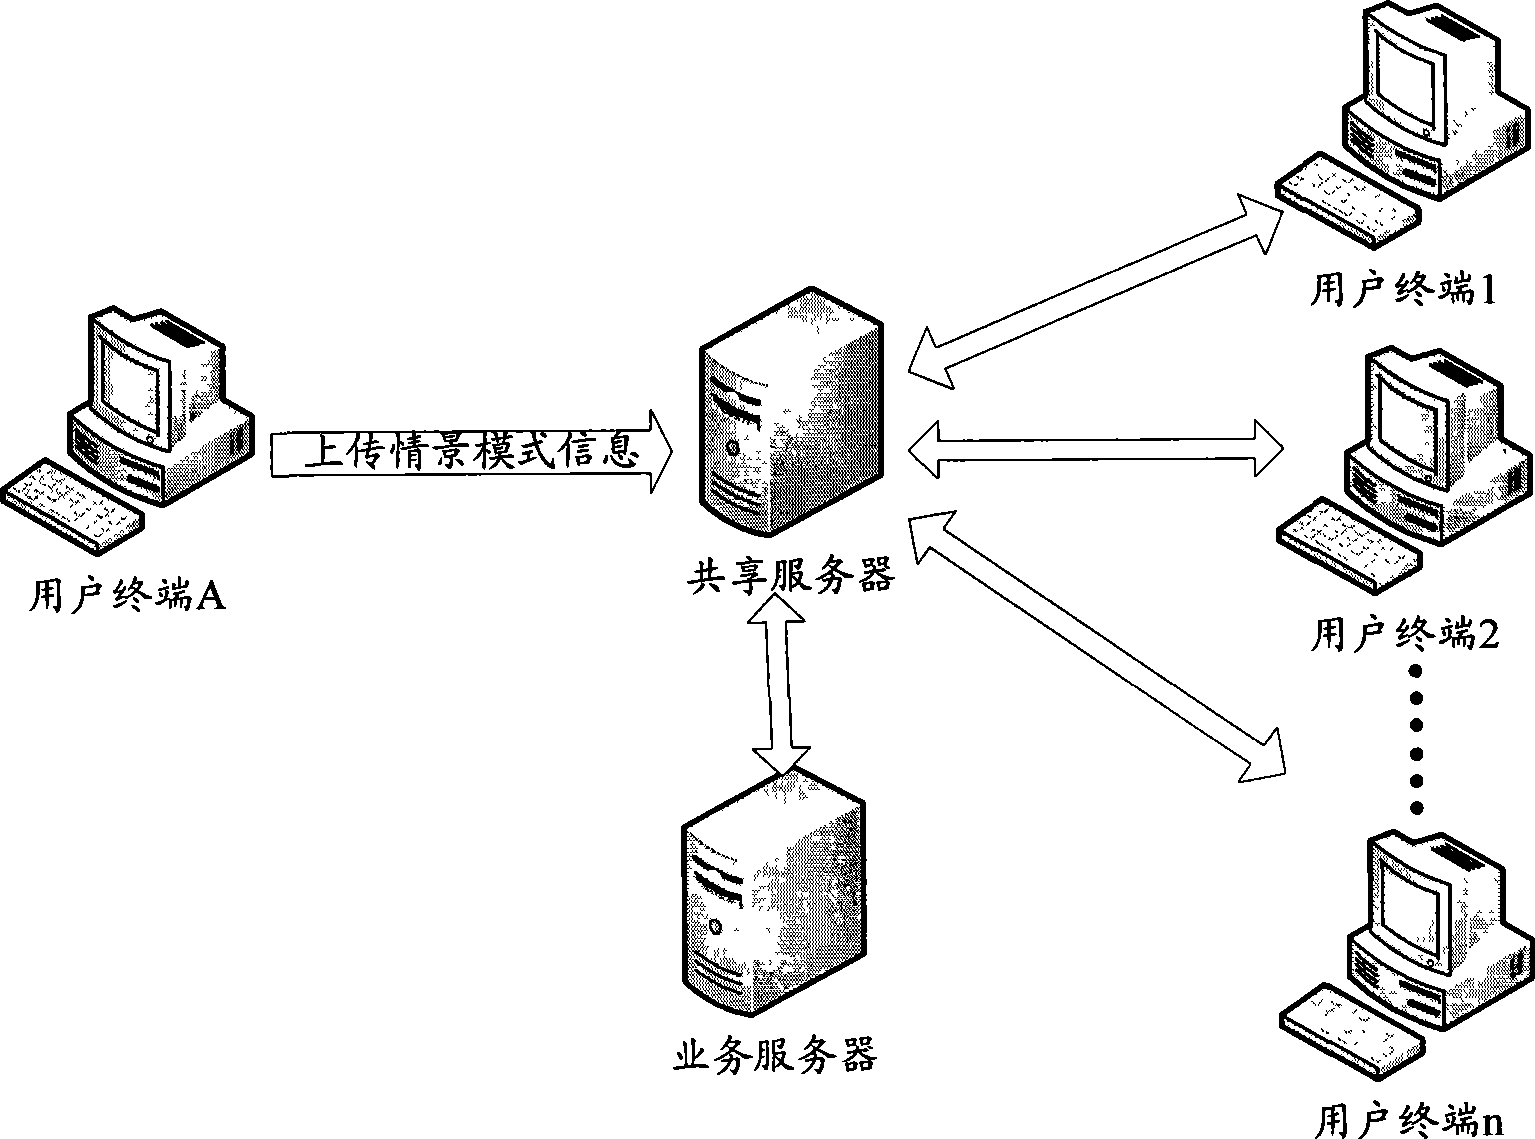 Method and apparatus for implementing scene mode share